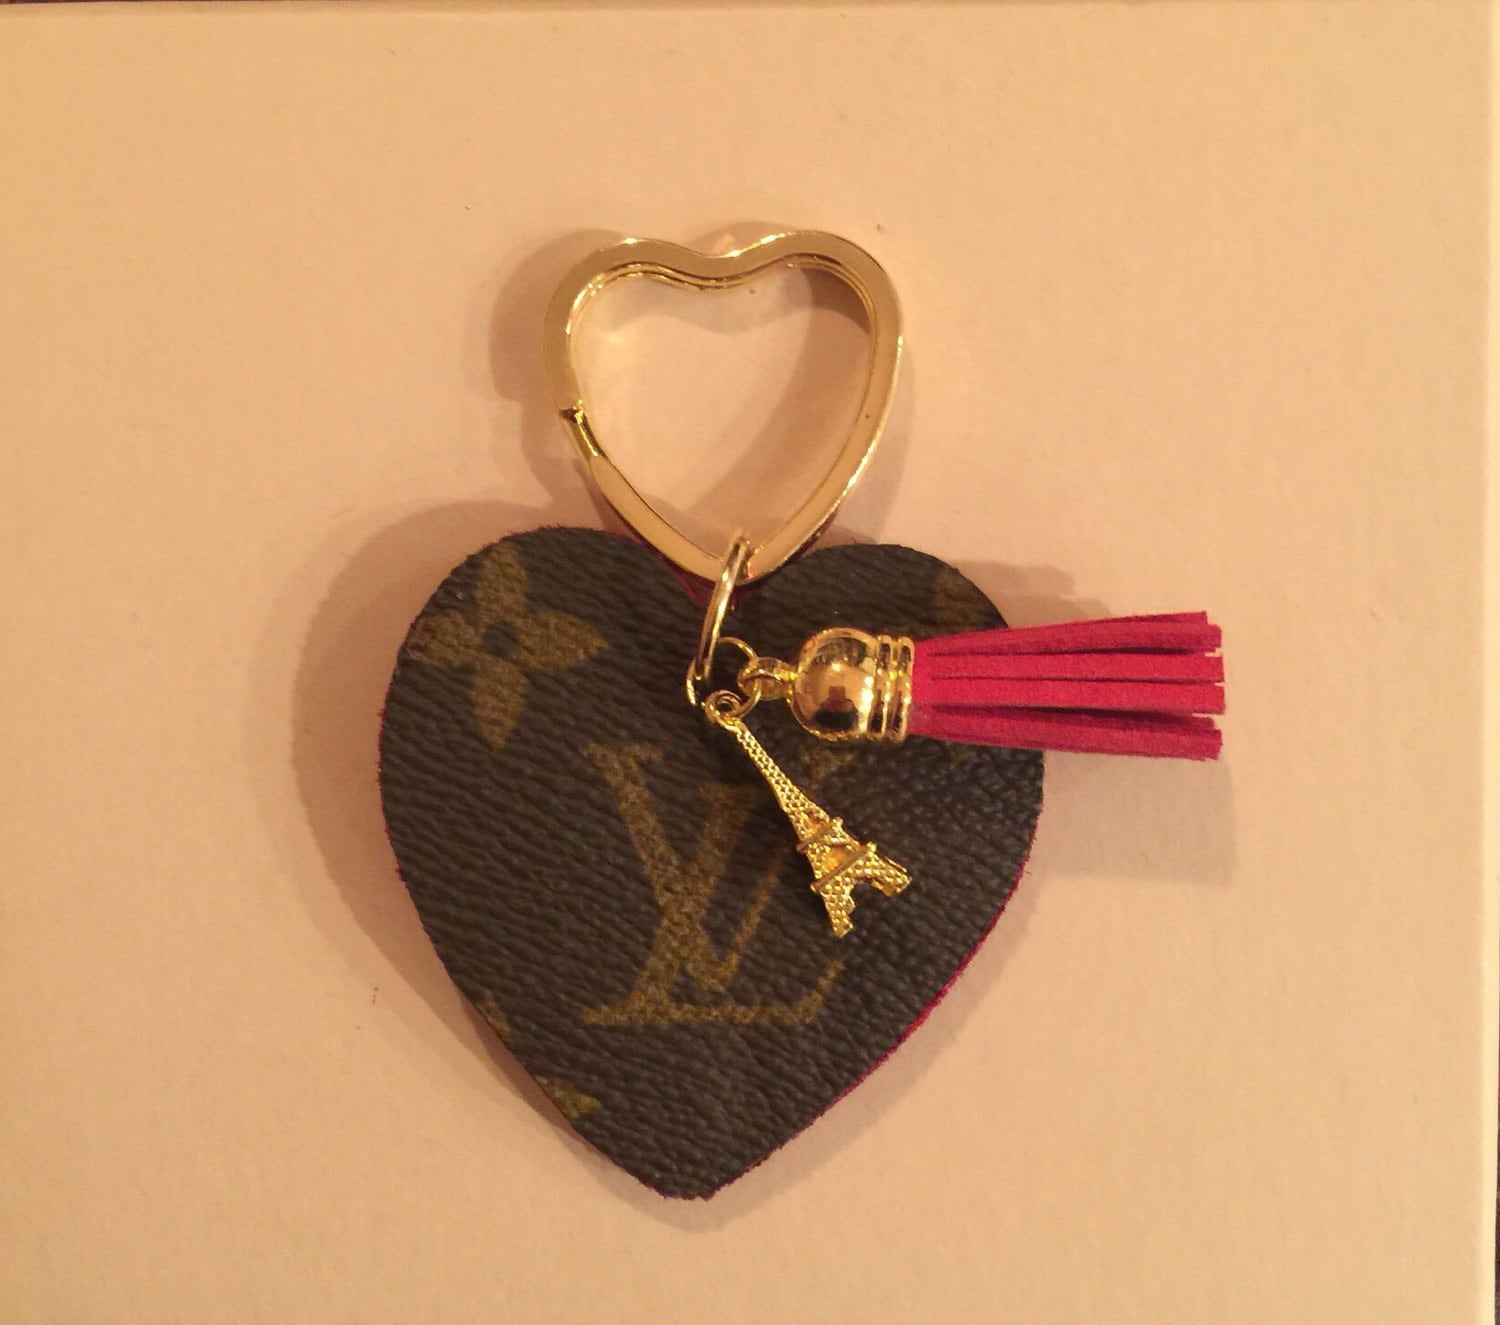 Heart shaped keychain upcylced from authentic Louis Vuitton